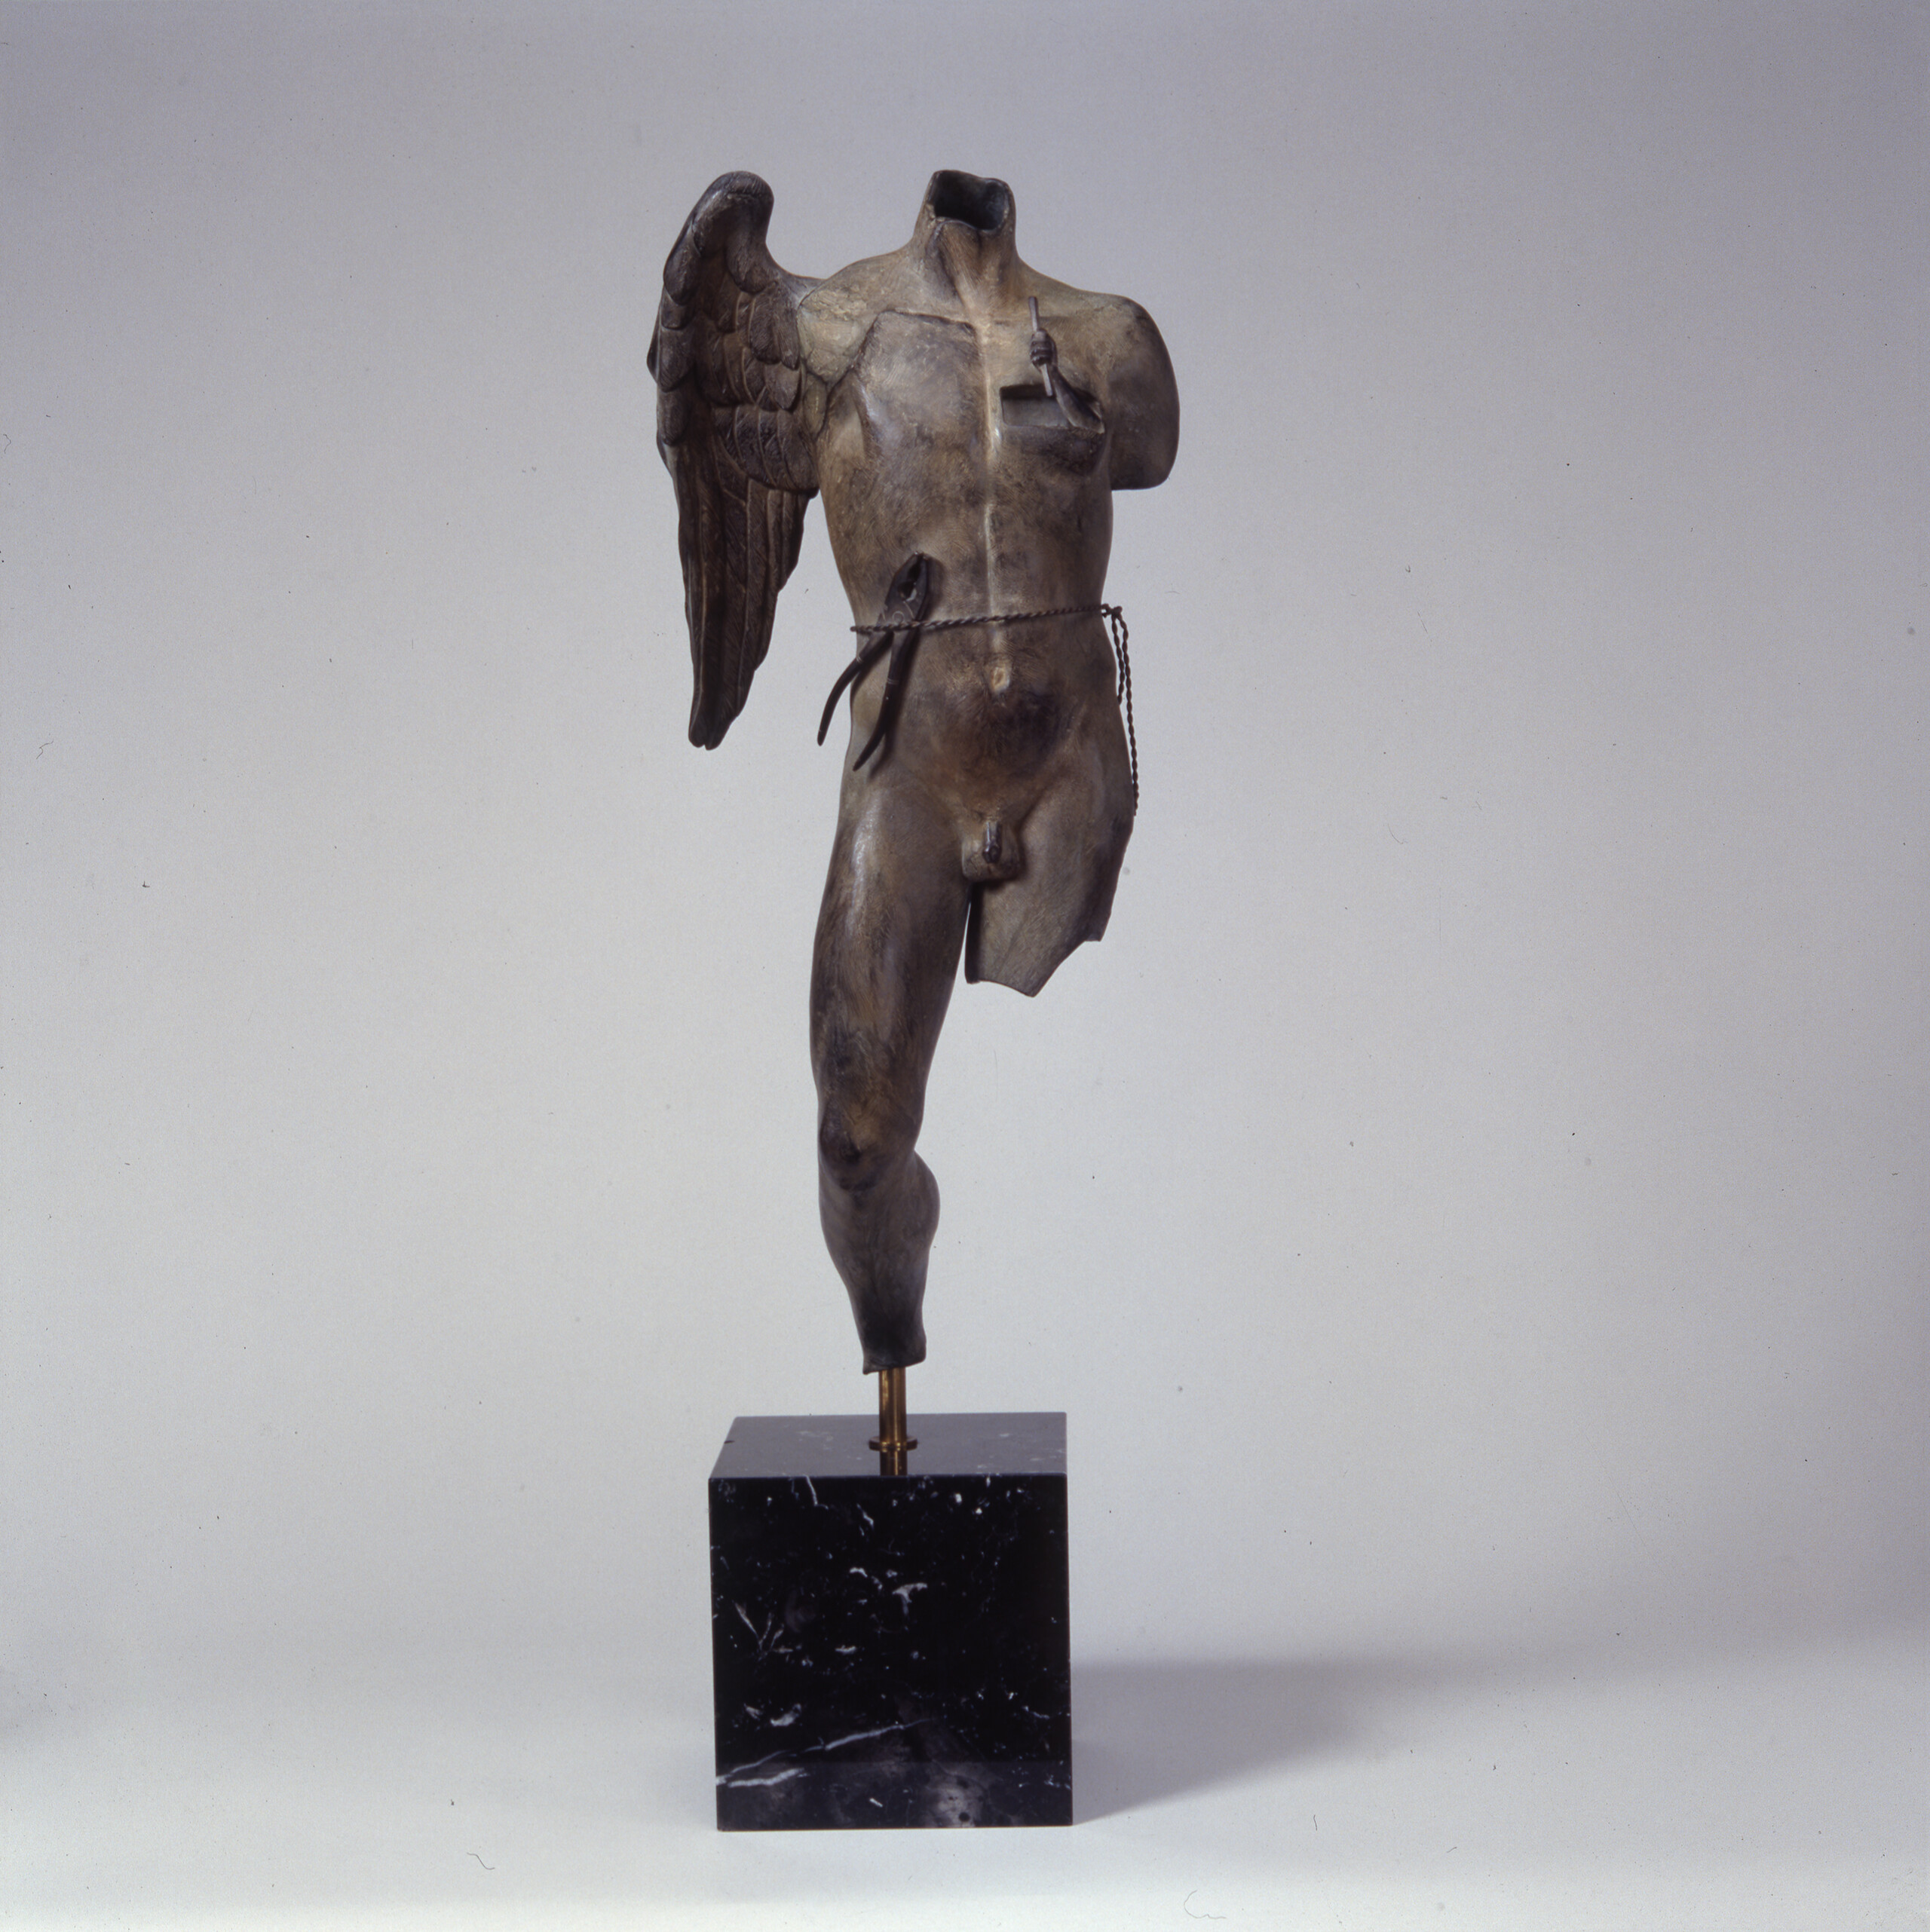 A bronze statue of a man's torso with one leg and one wing. The other leg is broken off. There is a thread around his waist, holding tongs. The broken-off leg and body make the sculpture seem ancient, as if it was retrieved from the ruins of an ancient city.